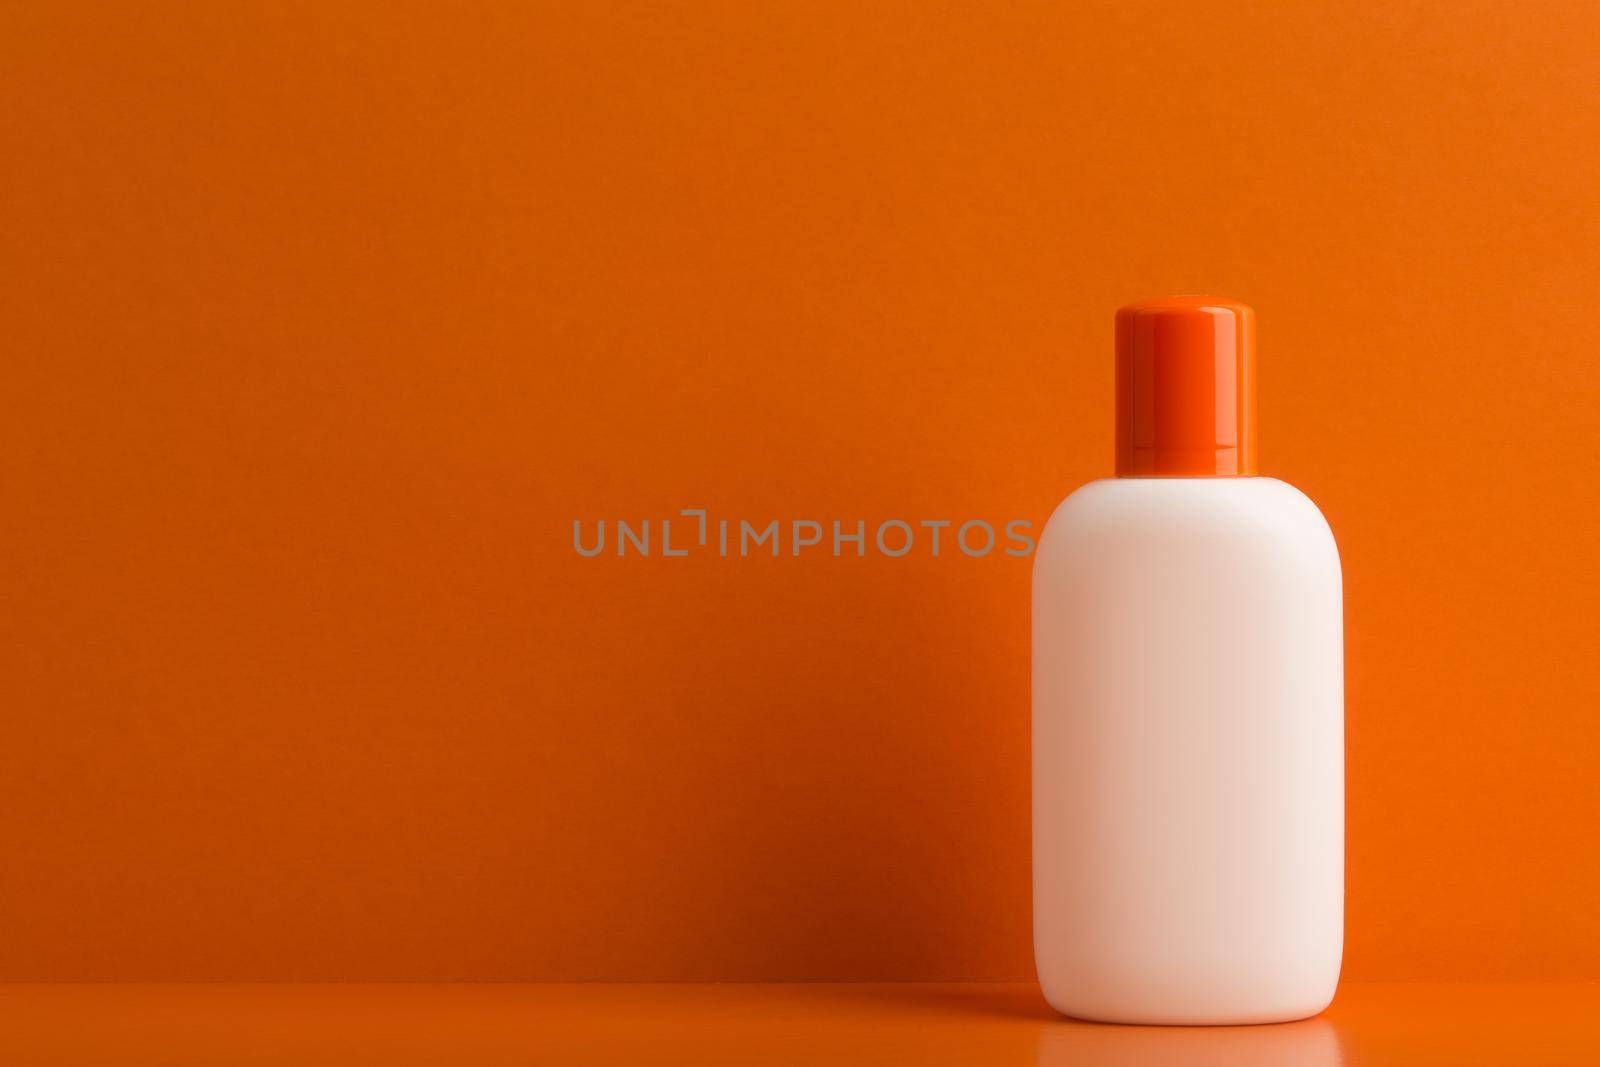 Minimalistic still life with sunscreen cream or lotion with orange cap on orange background with space for text. Concept of skin protection during summer and safe tan